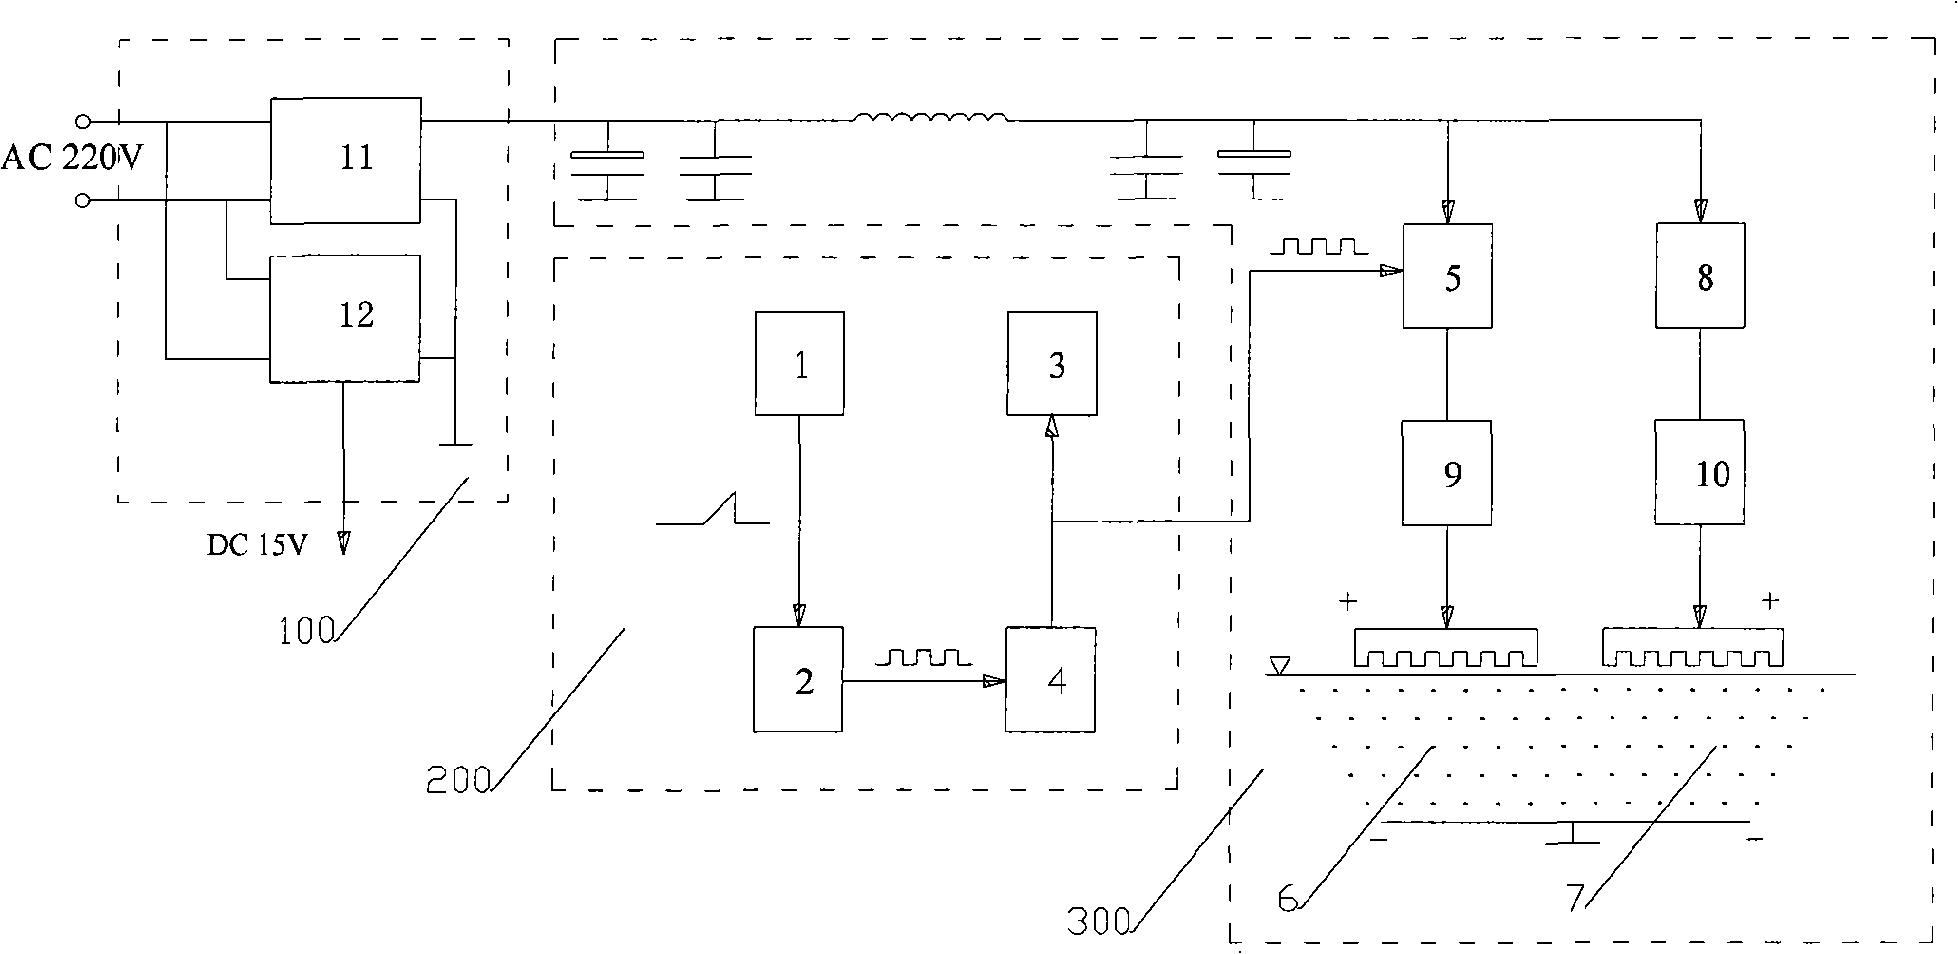 Water treatment process and equipment